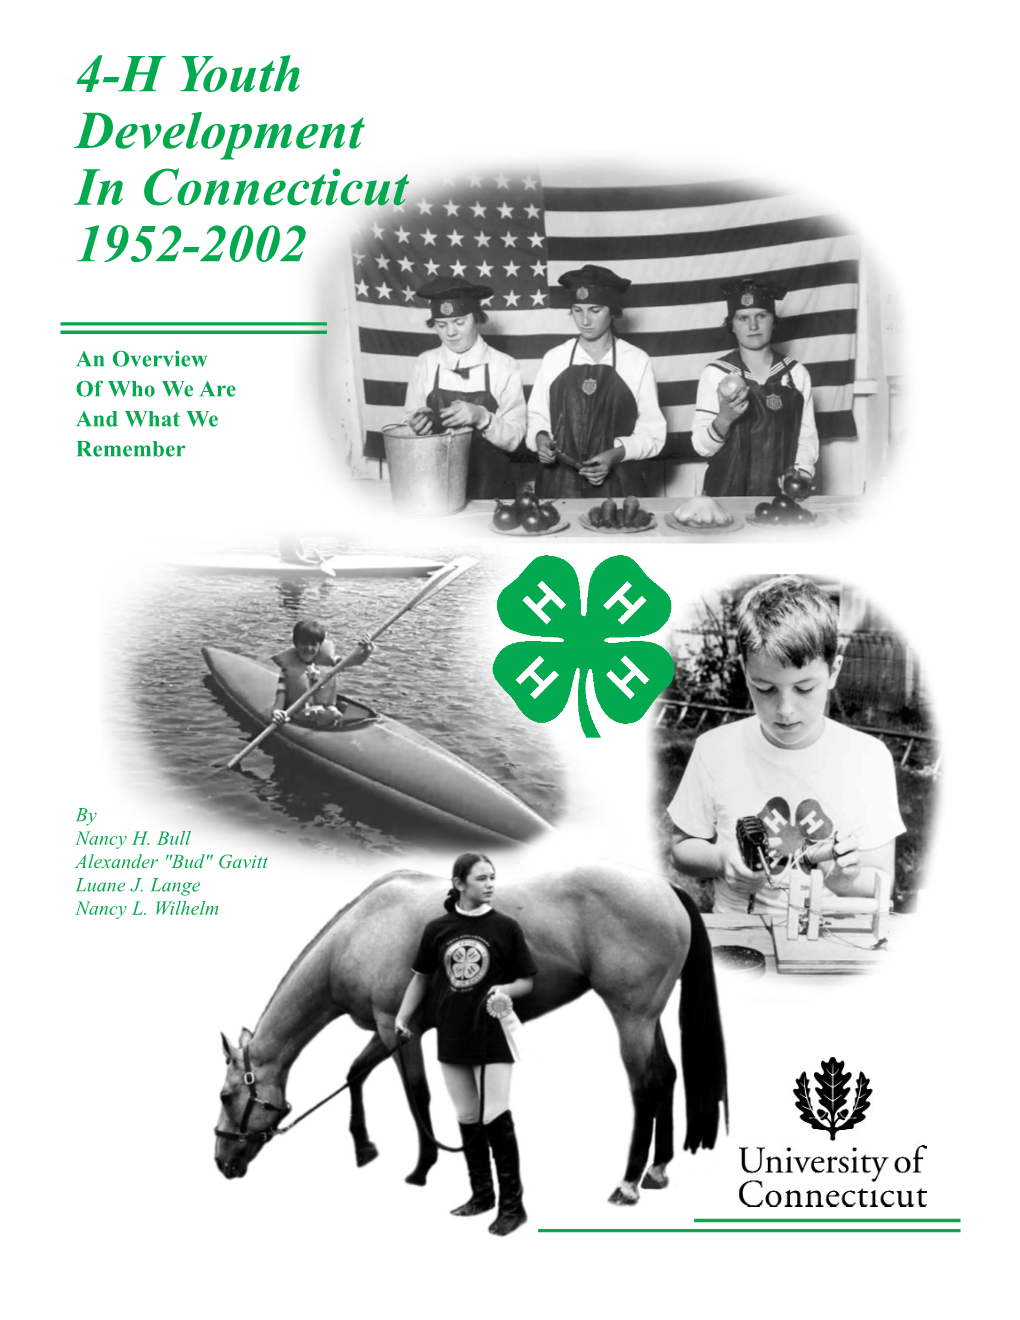 4-H Youth Development in Connecticut 1952-2002